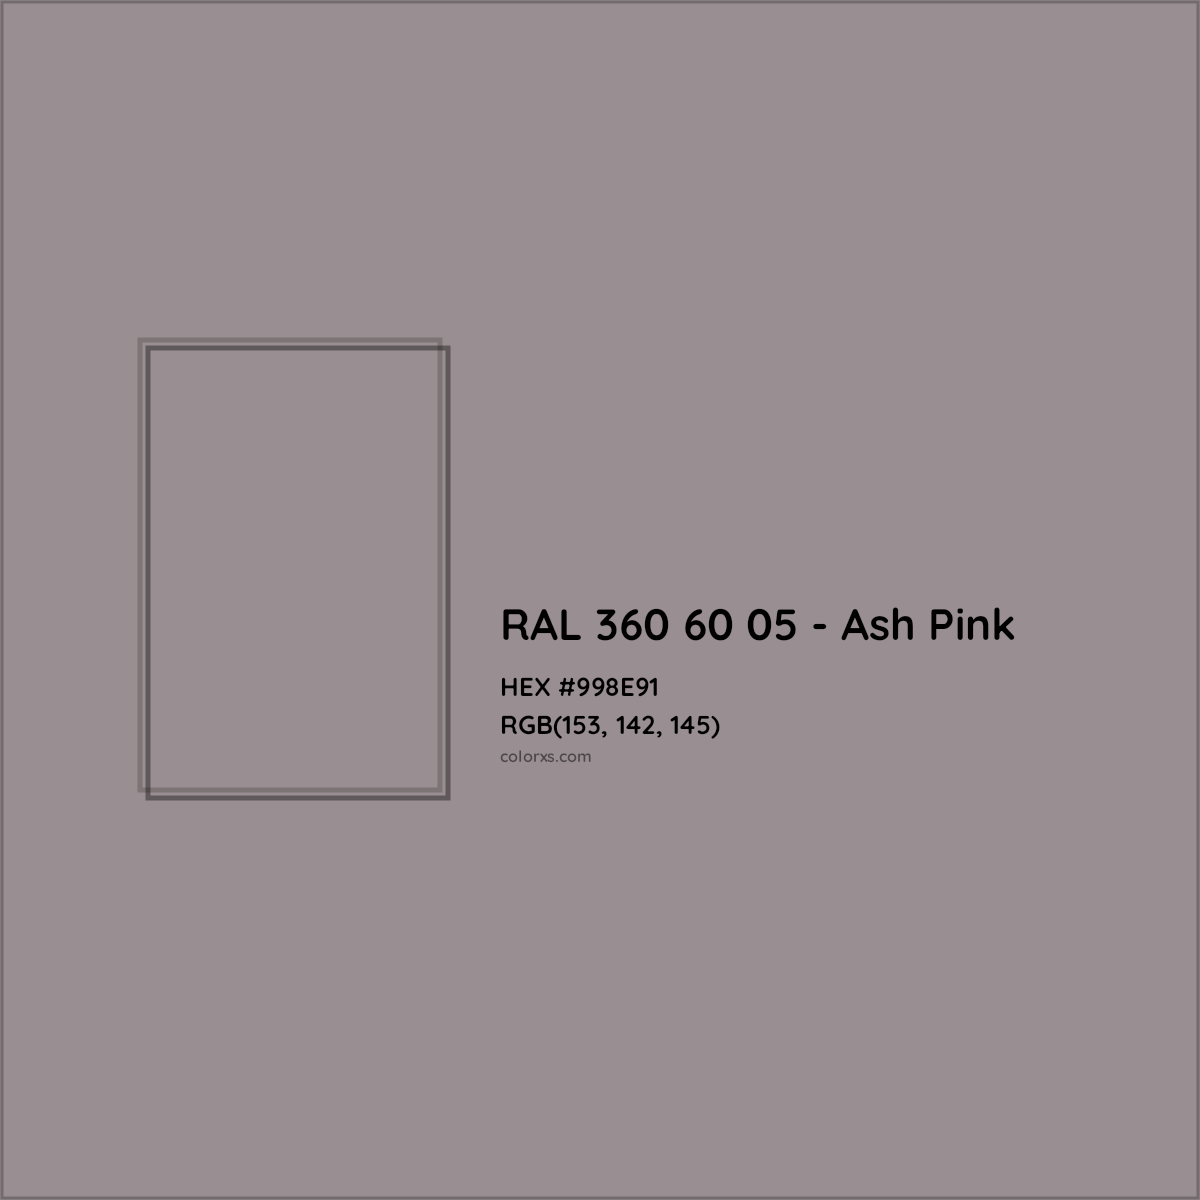 HEX #998E91 RAL 360 60 05 - Ash Pink CMS RAL Design - Color Code